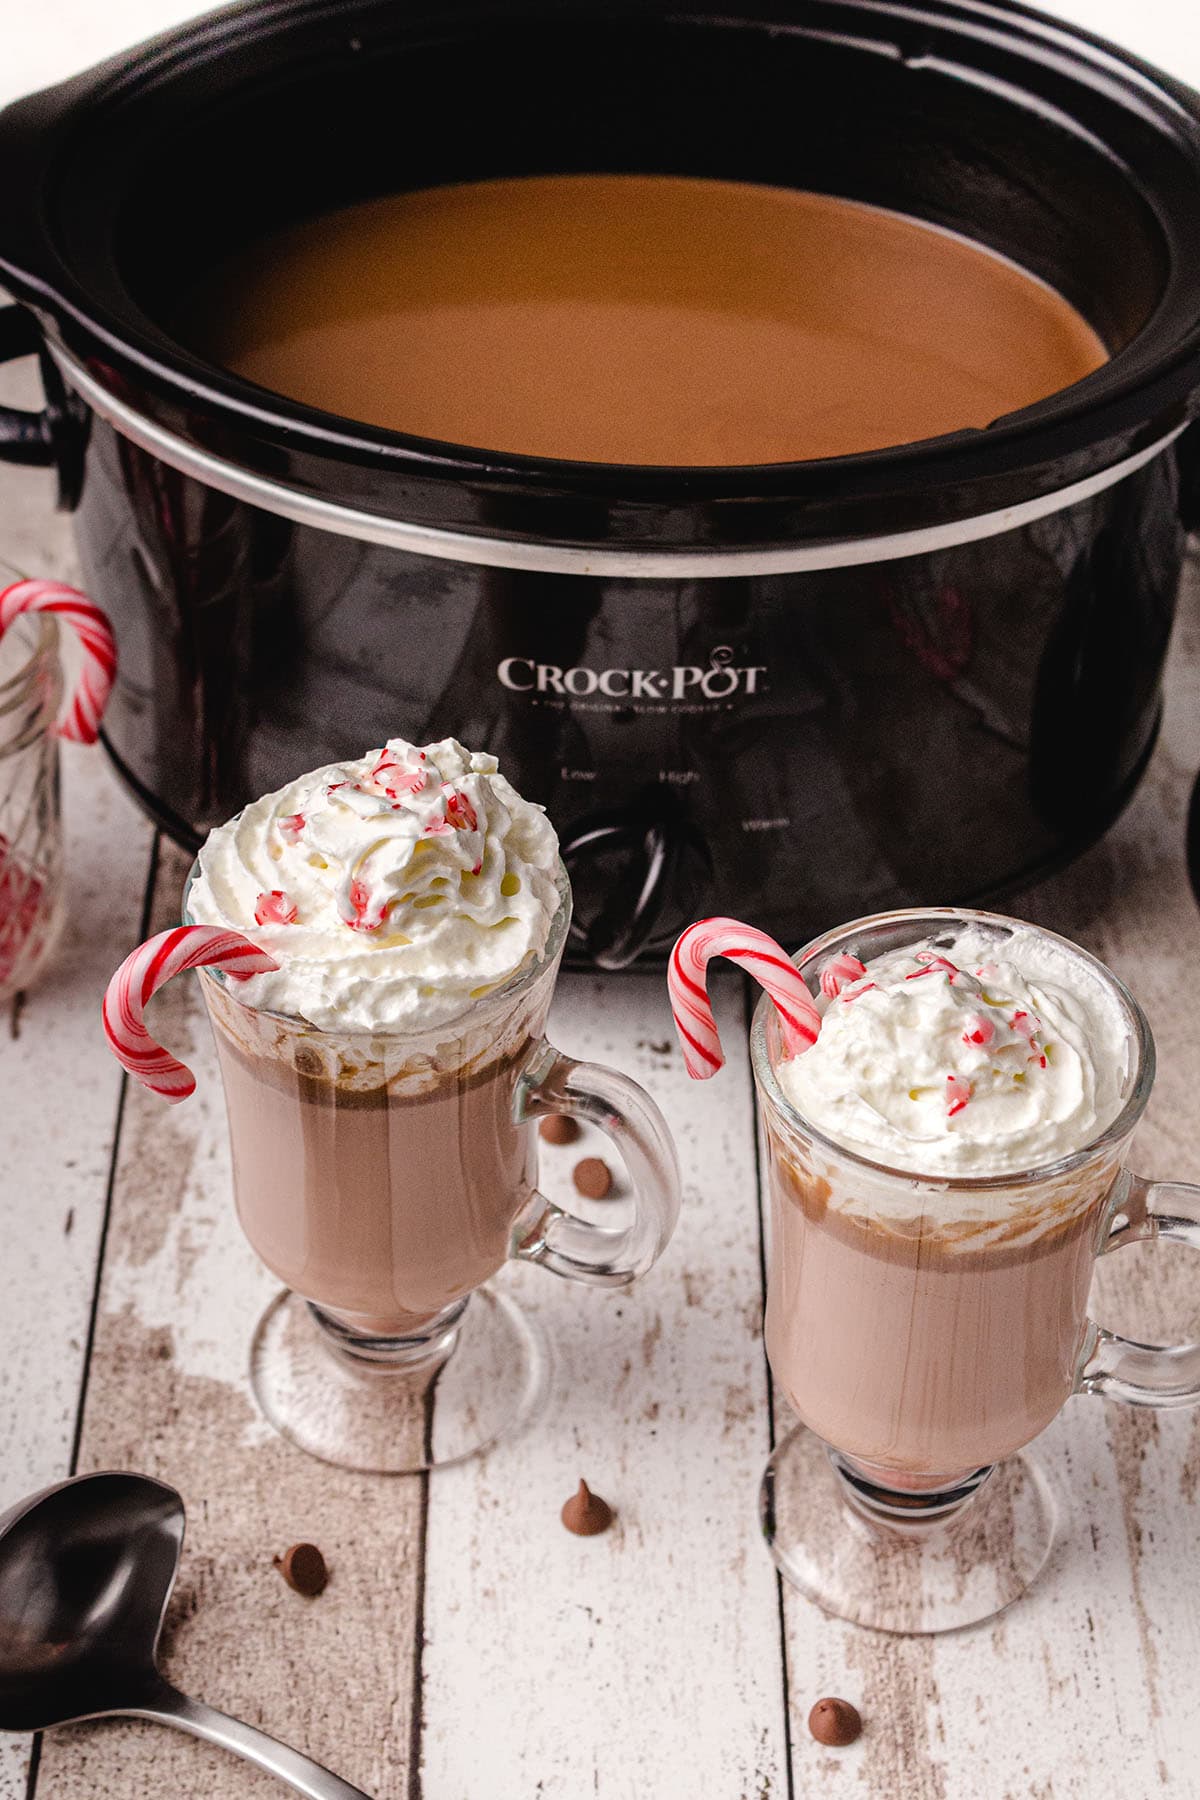 hot chocolate with whipped cream